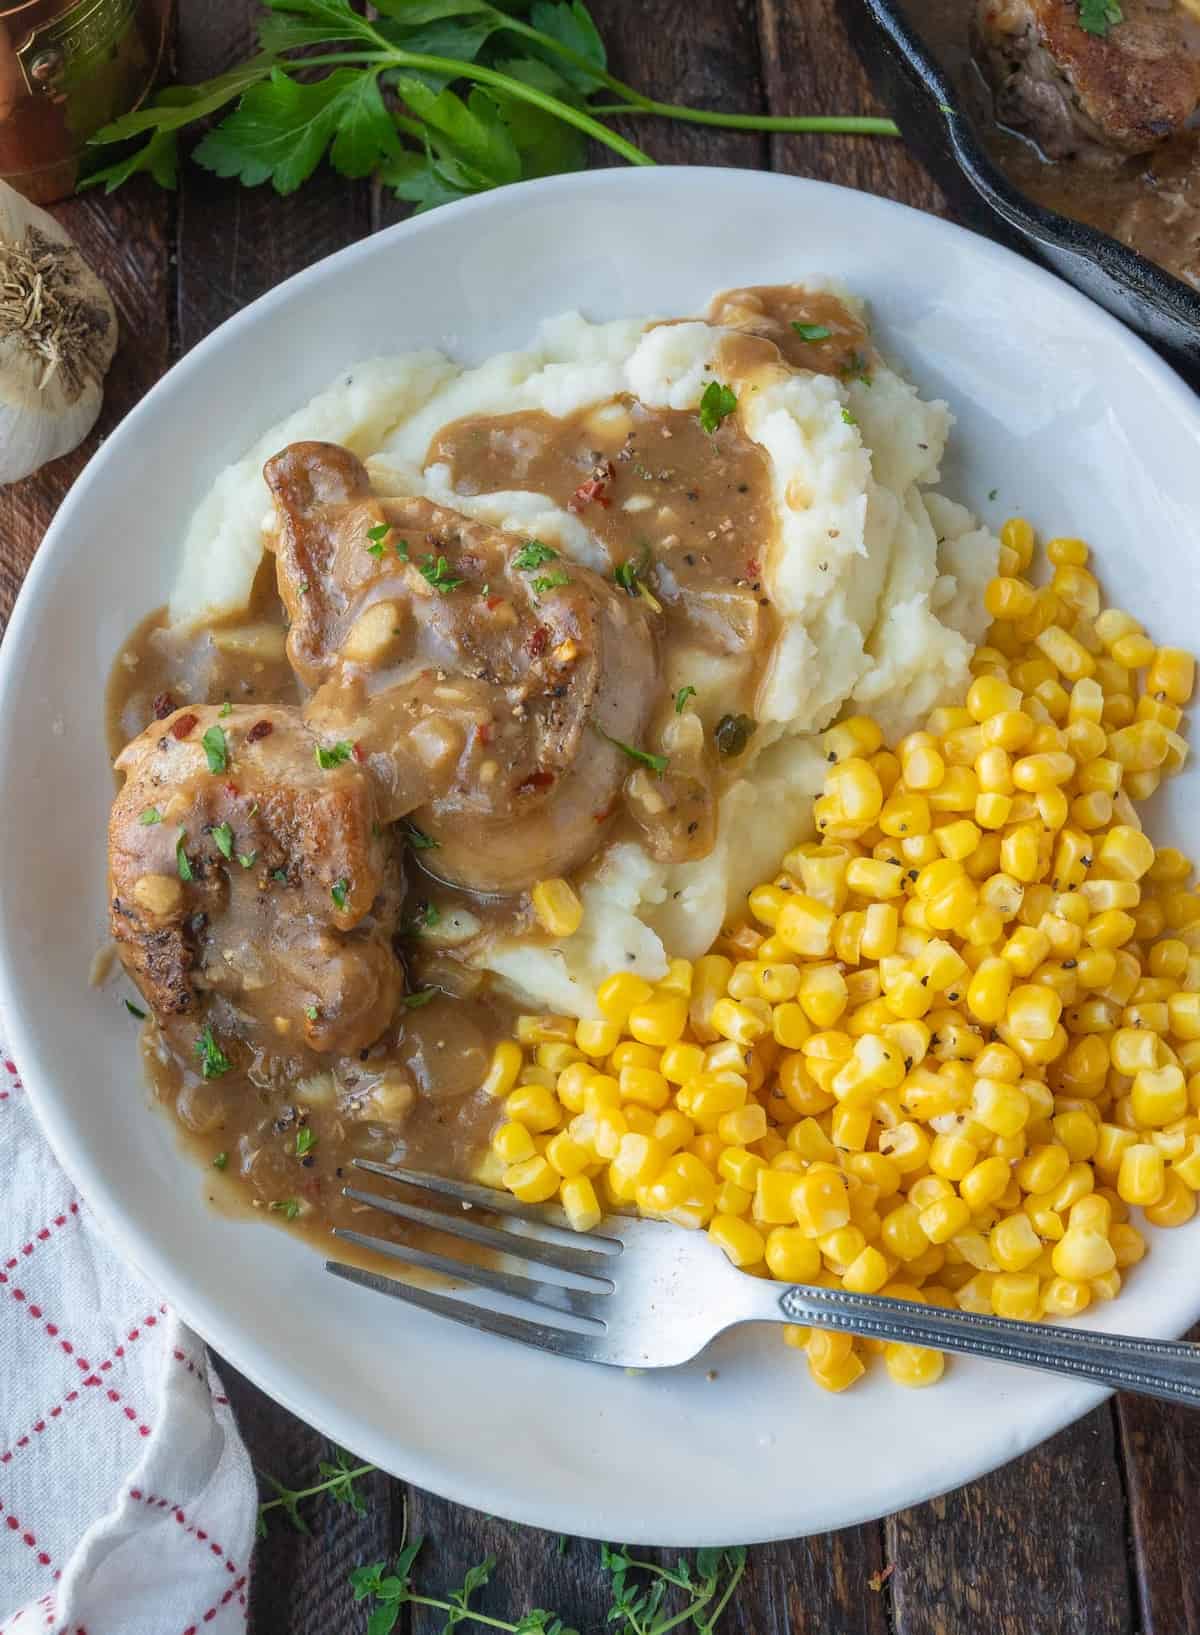 Pork medallions with onion gravy served over mashed potatoes with a side of corn.